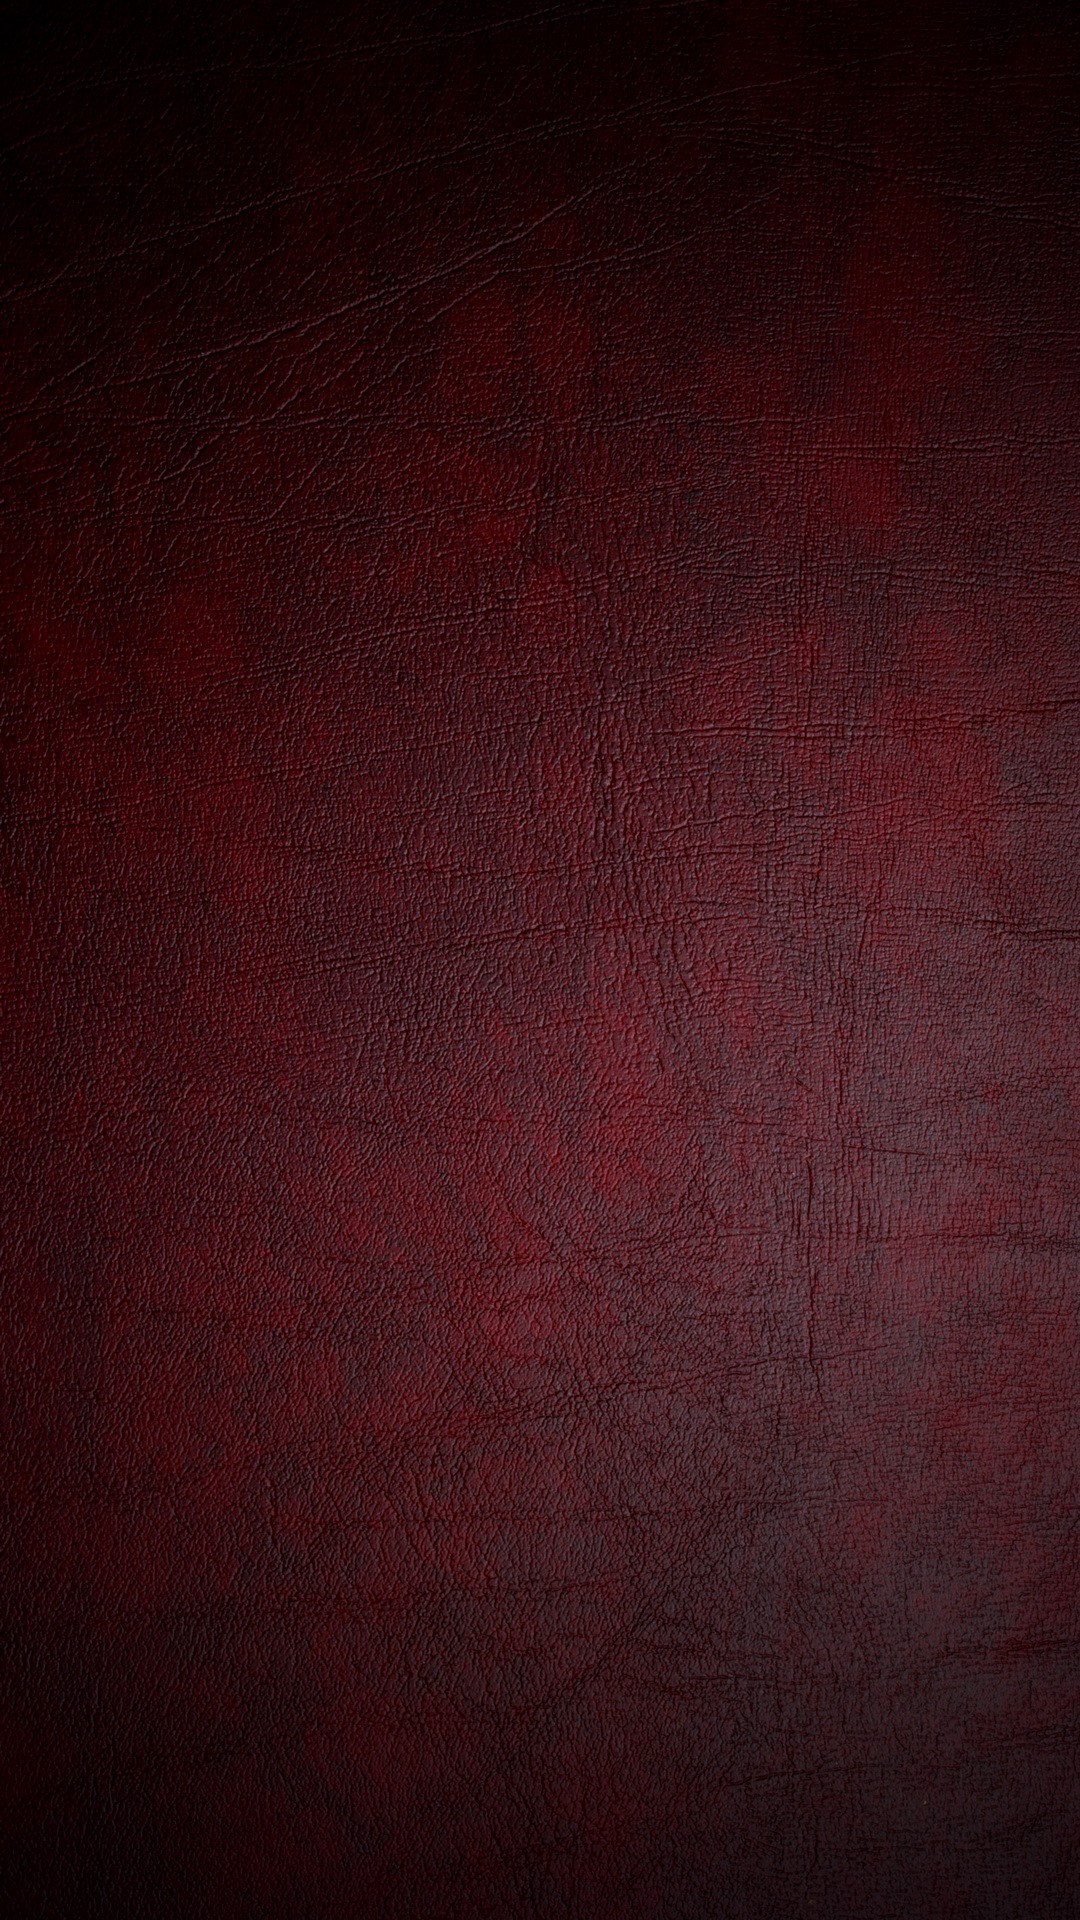 Leather Background Images HD Pictures and Wallpaper For Free Download   Pngtree